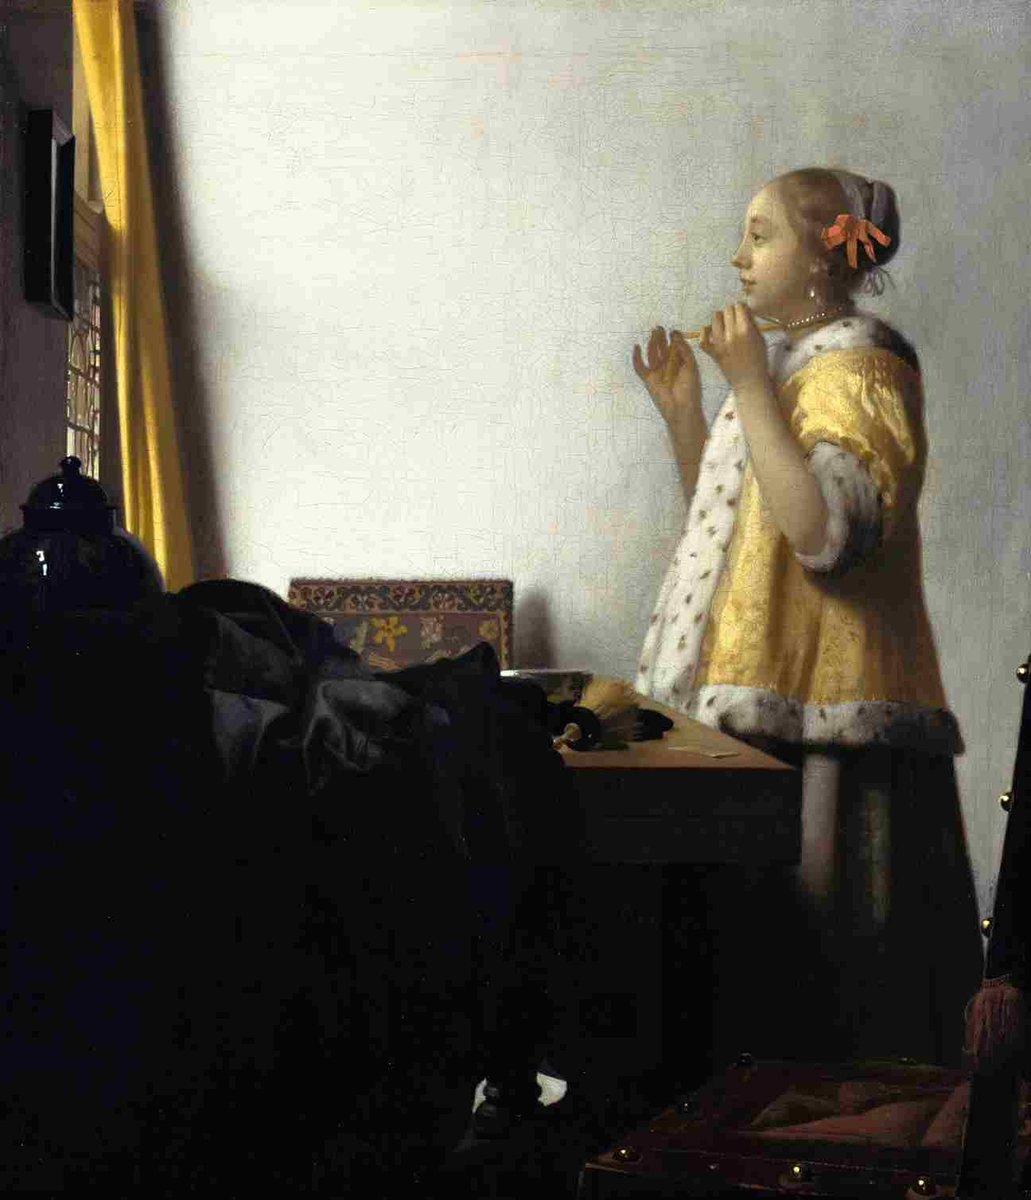 Johannes Vermeer Young Woman with a Pearl Necklace (from 1663 until 1665)